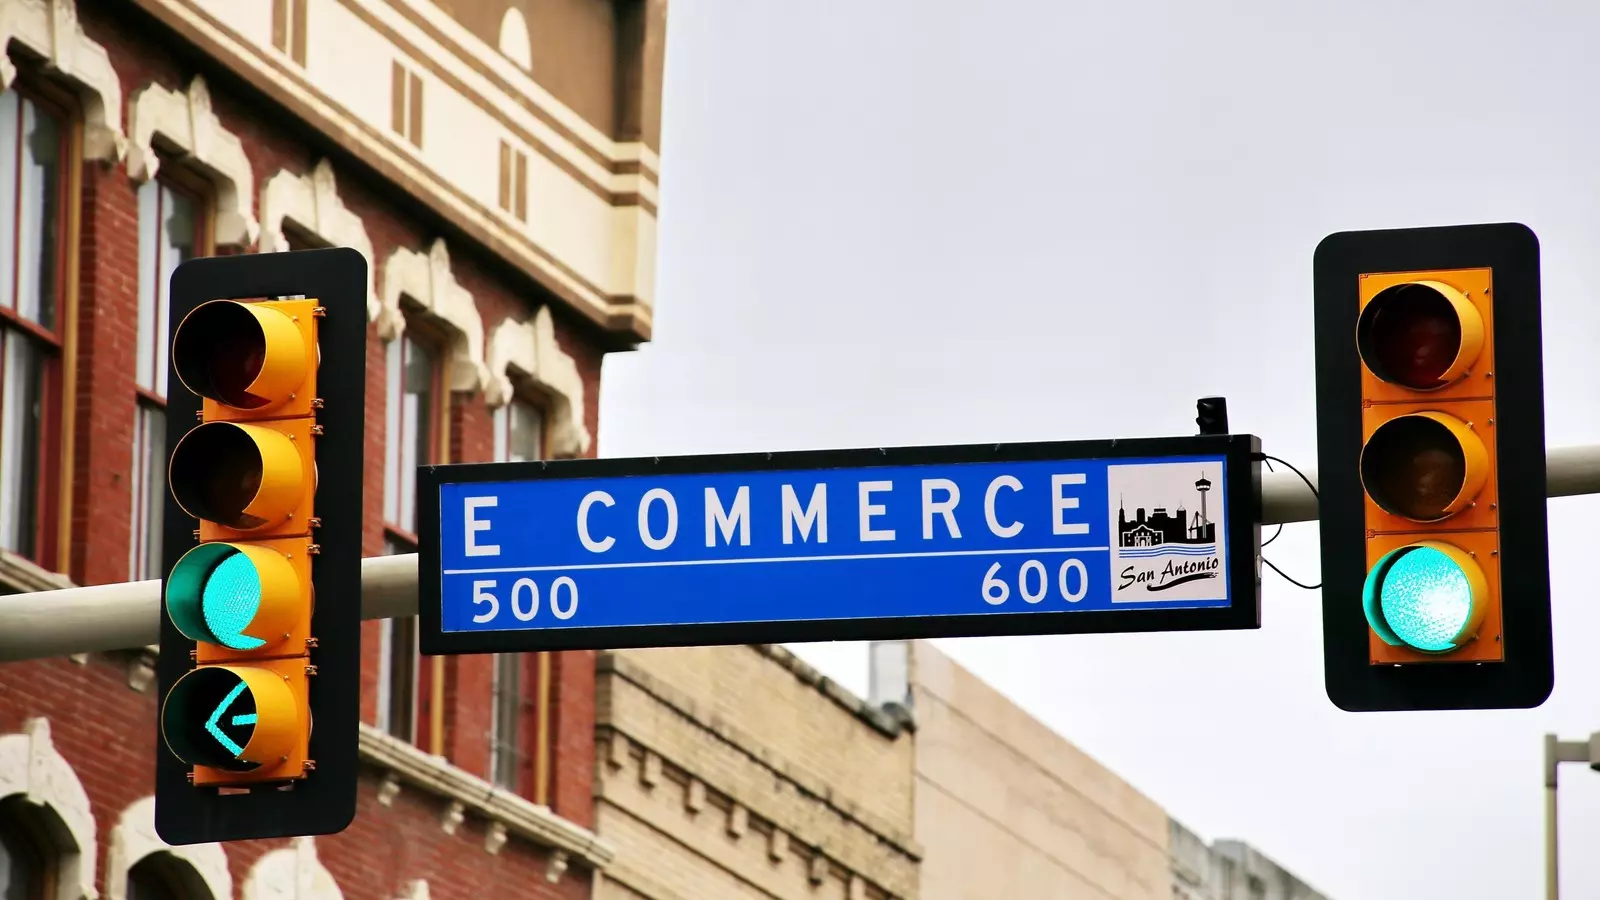 A shot of a road sign amongst traffic lights, instead of a street name the sign reads "ecommerce"